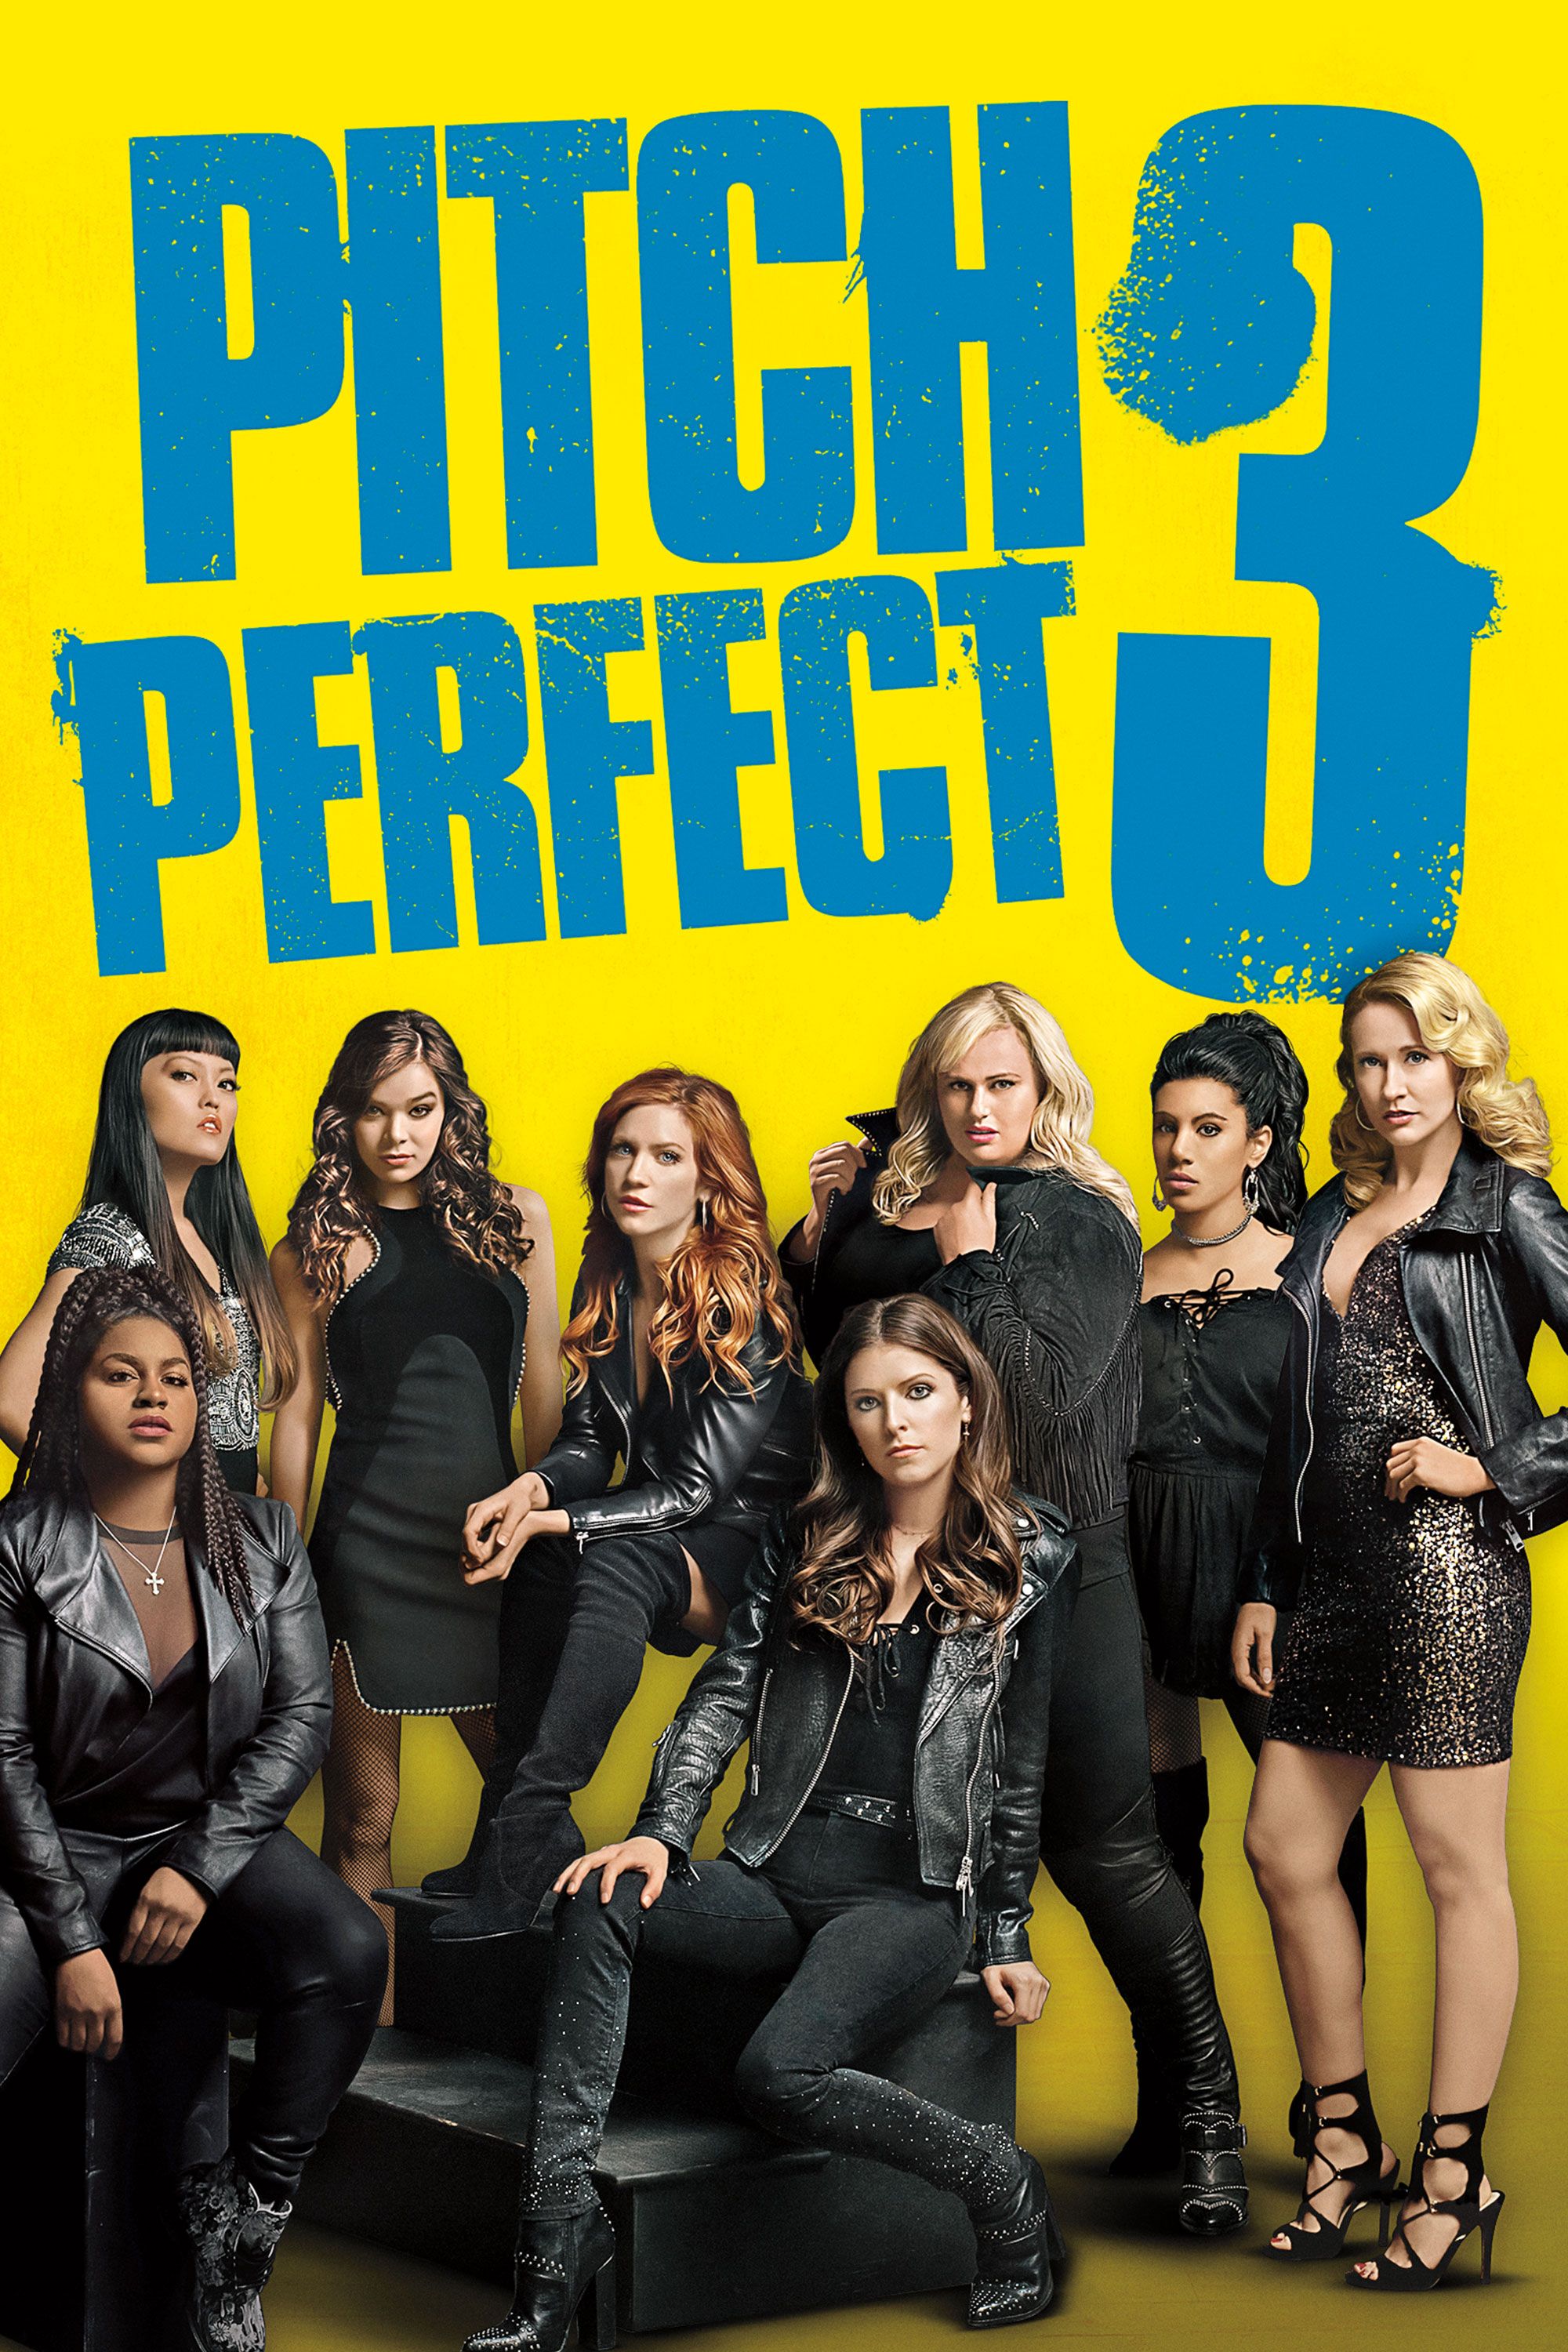 Pitch Perfect Full Movie Online Free Telegraph